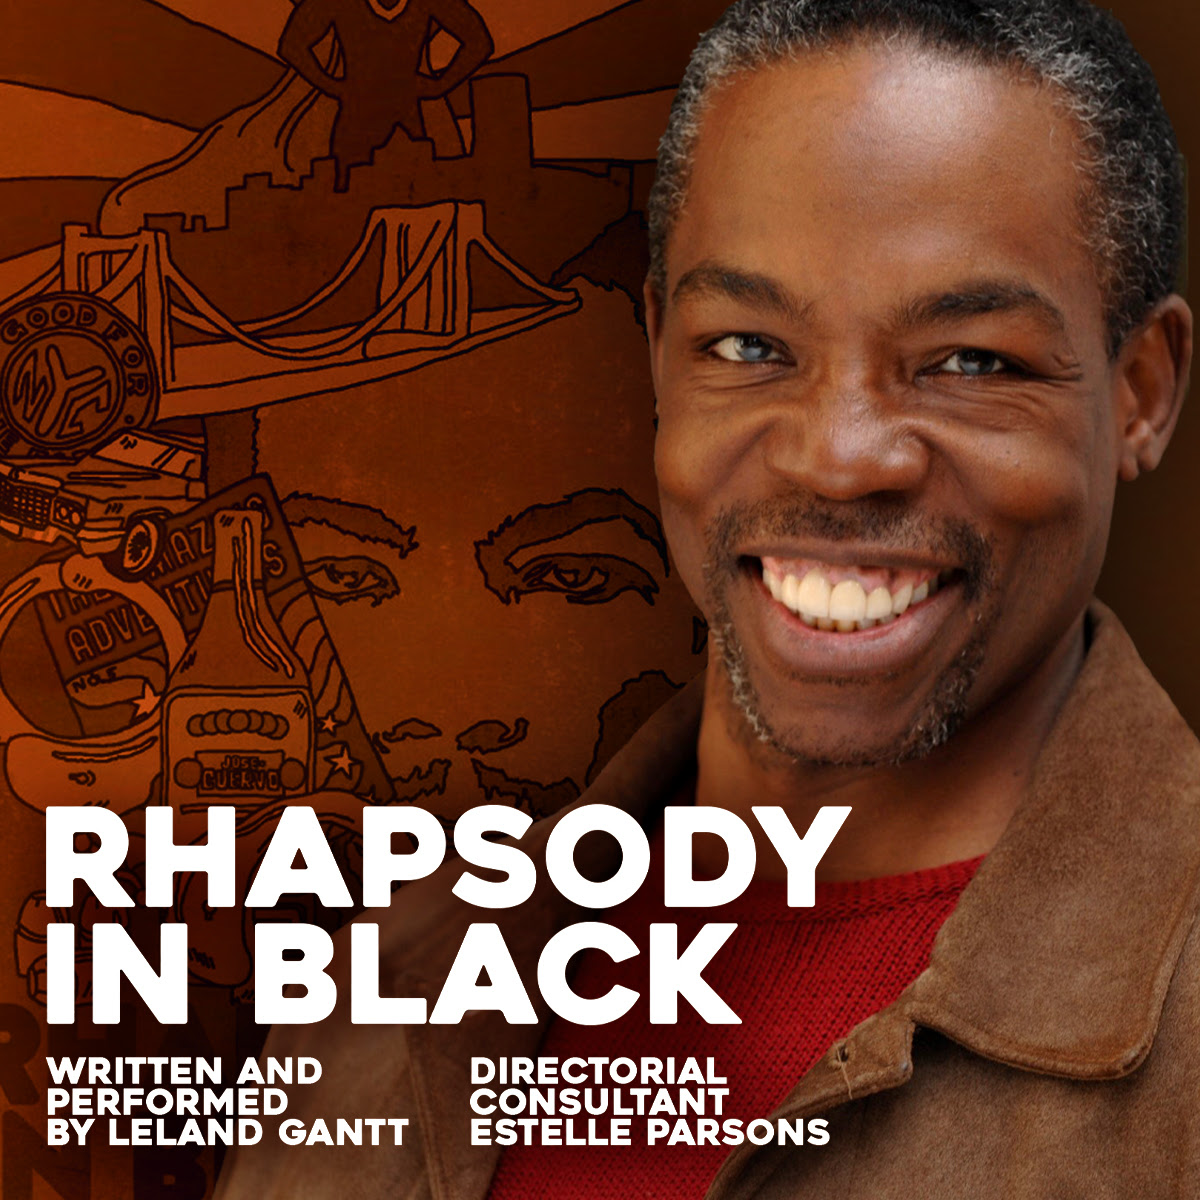 Writer and Actor LeLand Gantt Brings One Man Show Rhapsody in Black to TPAC Sept. 23-25